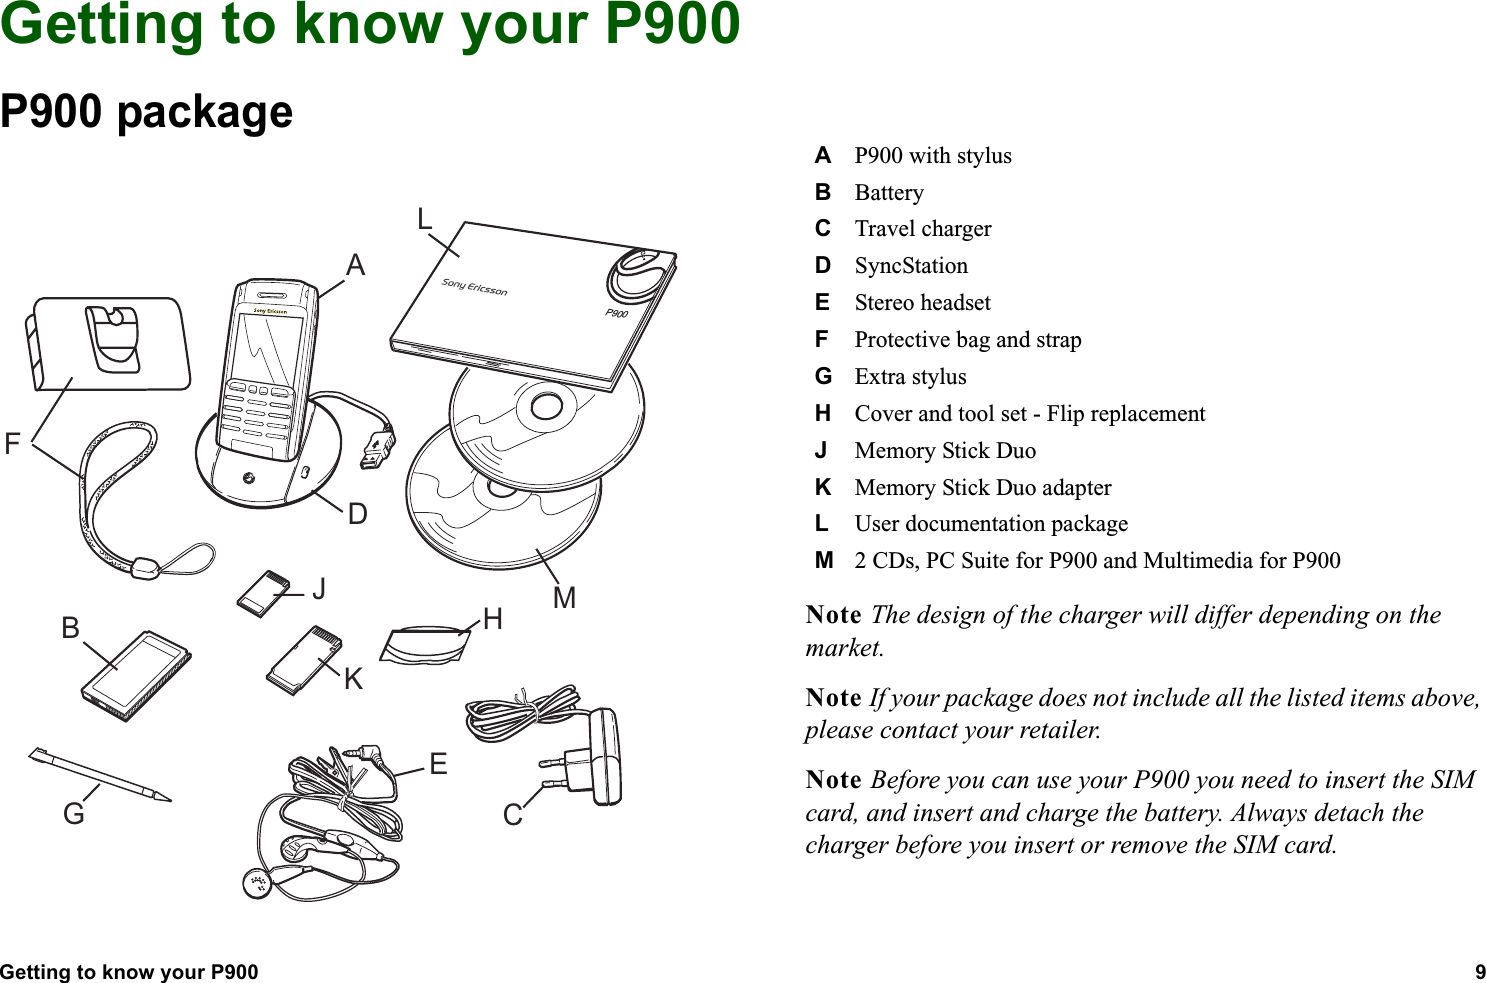 Getting to know your P900 9  Getting to know your P900P900 package Note The design of the charger will differ depending on the market.Note If your package does not include all the listed items above, please contact your retailer.Note Before you can use your P900 you need to insert the SIM card, and insert and charge the battery. Always detach the charger before you insert or remove the SIM card.BCADEFHJKMP900LGAP900 with stylusBBatteryCTravel chargerDSyncStationEStereo headsetFProtective bag and strapGExtra stylusHCover and tool set - Flip replacementJMemory Stick DuoKMemory Stick Duo adapterLUser documentation packageM  2 CDs, PC Suite for P900 and Multimedia for P900